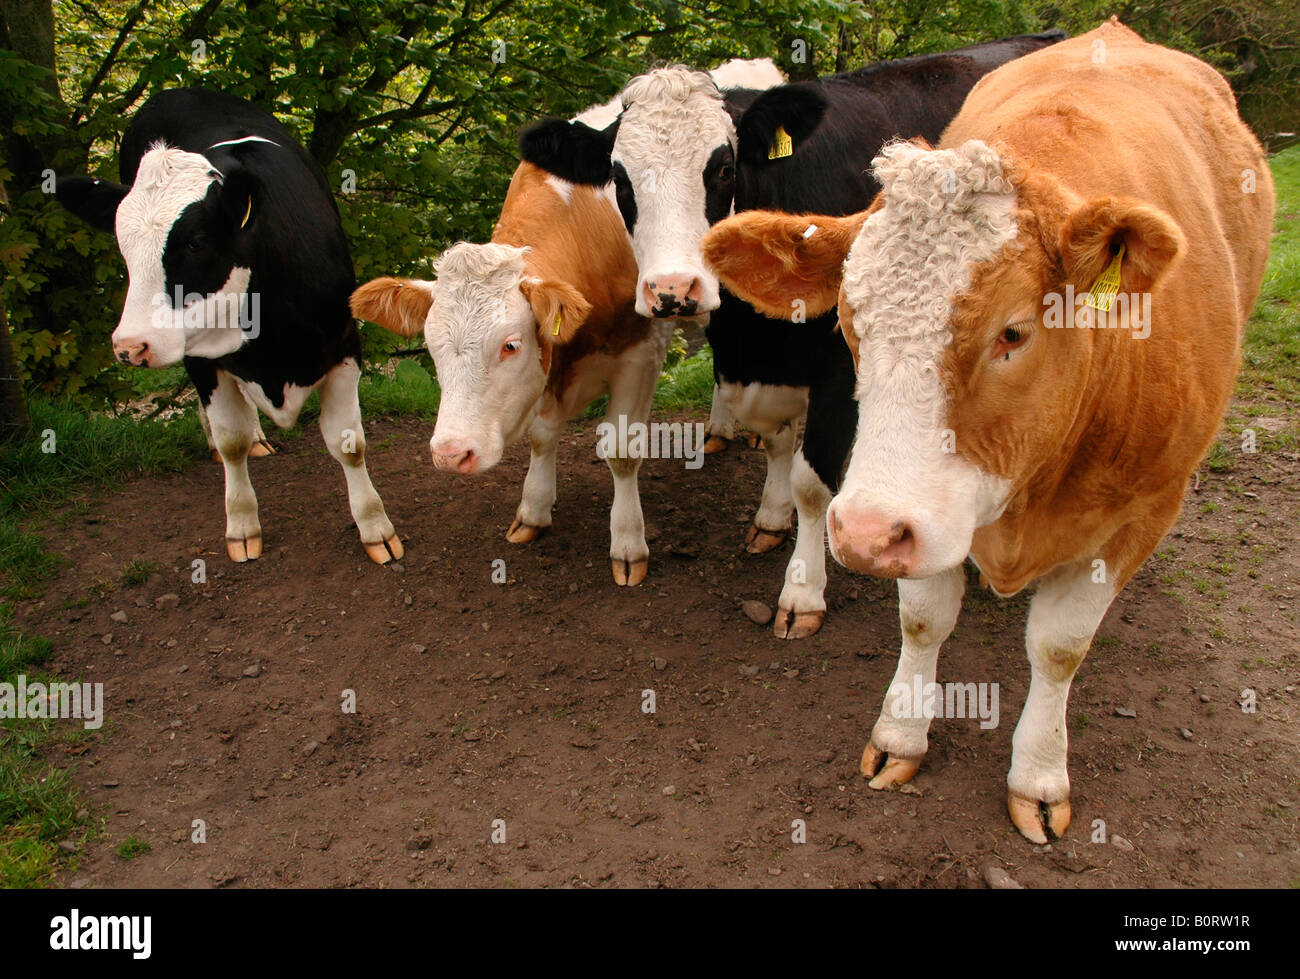 A close up of a  group of young black/white and tan/white cows standing in a field. Stock Photo